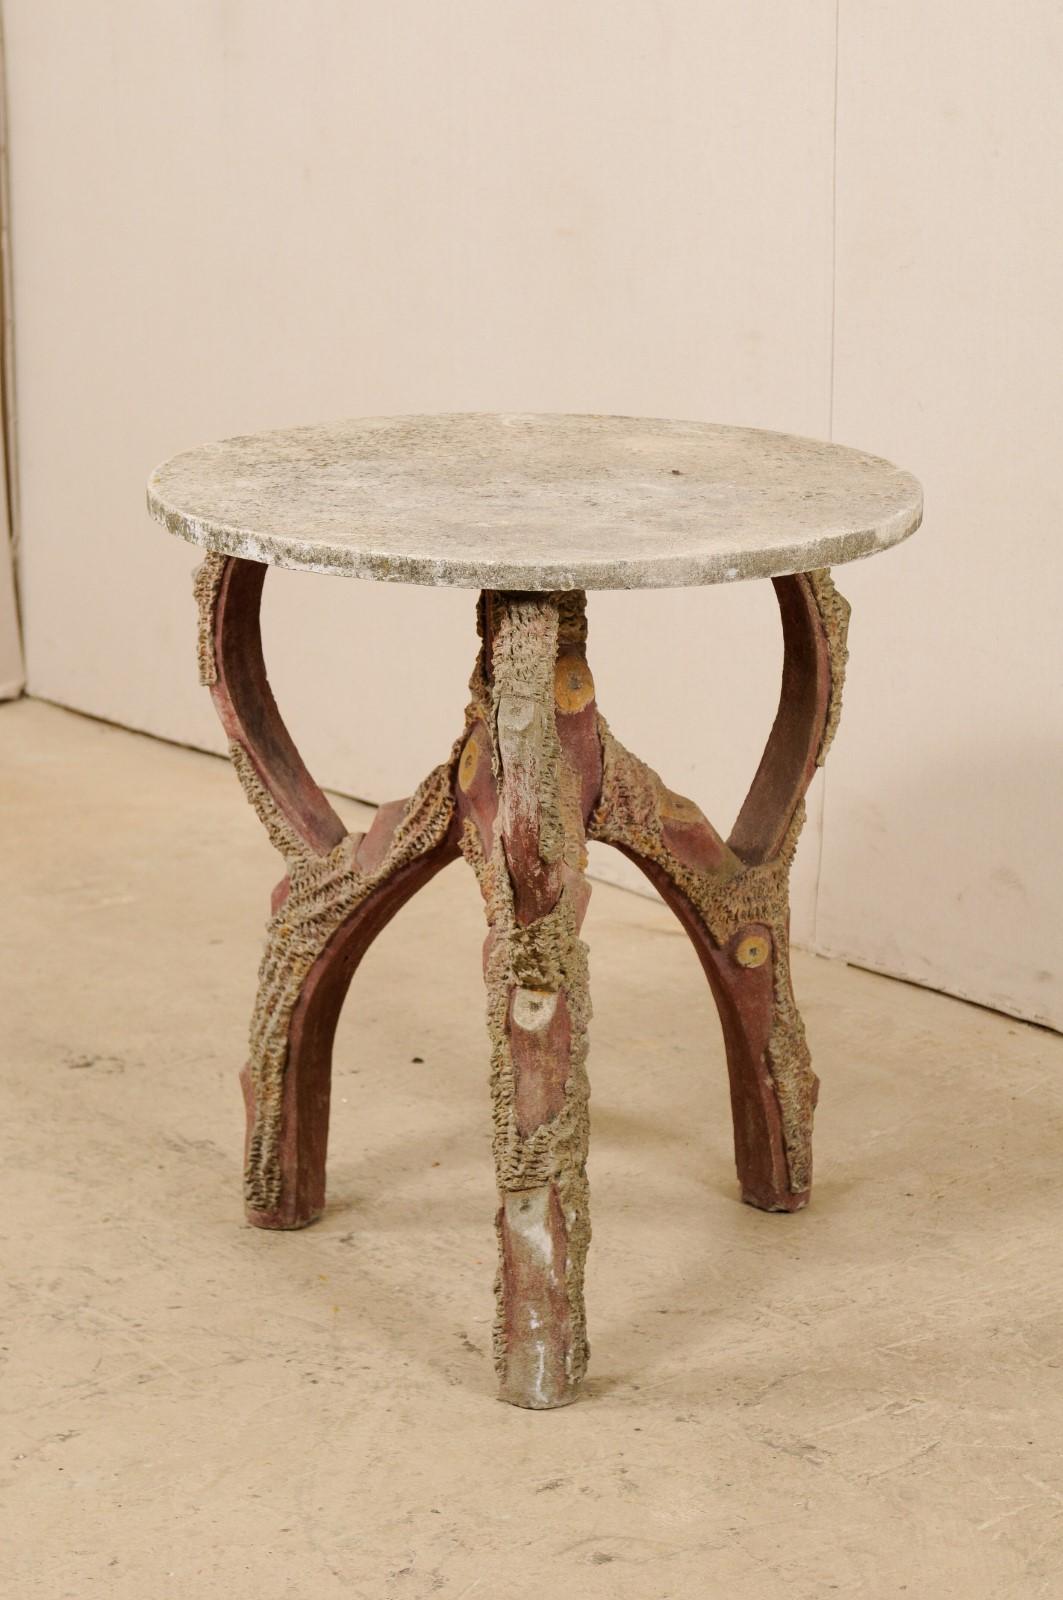 A French faux bois table from the mid-20th century. This occasional table from France has a 29